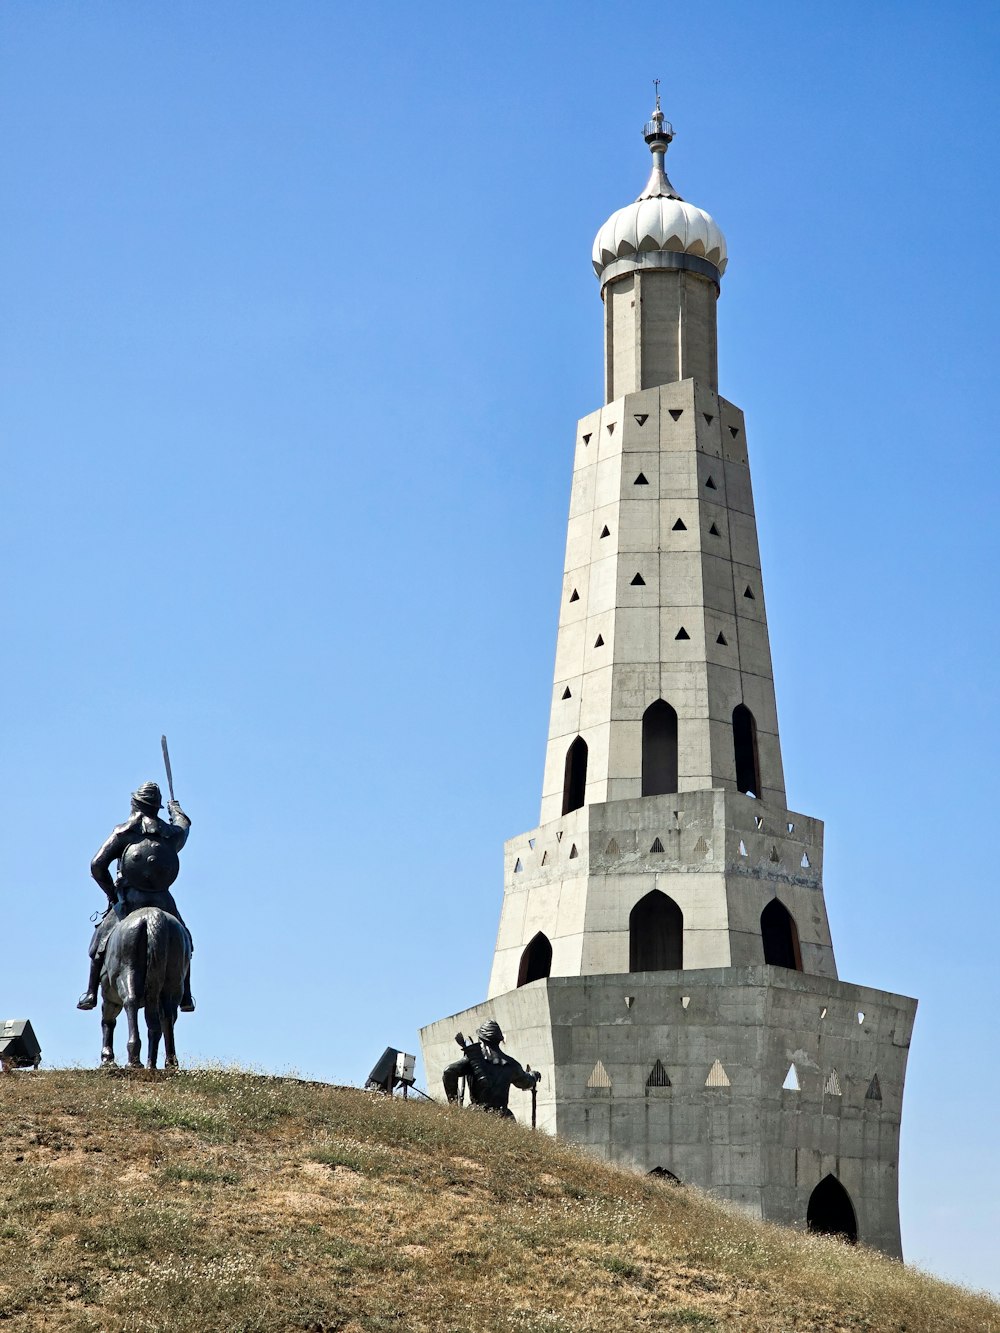 a statue of a man on a horse next to a tower